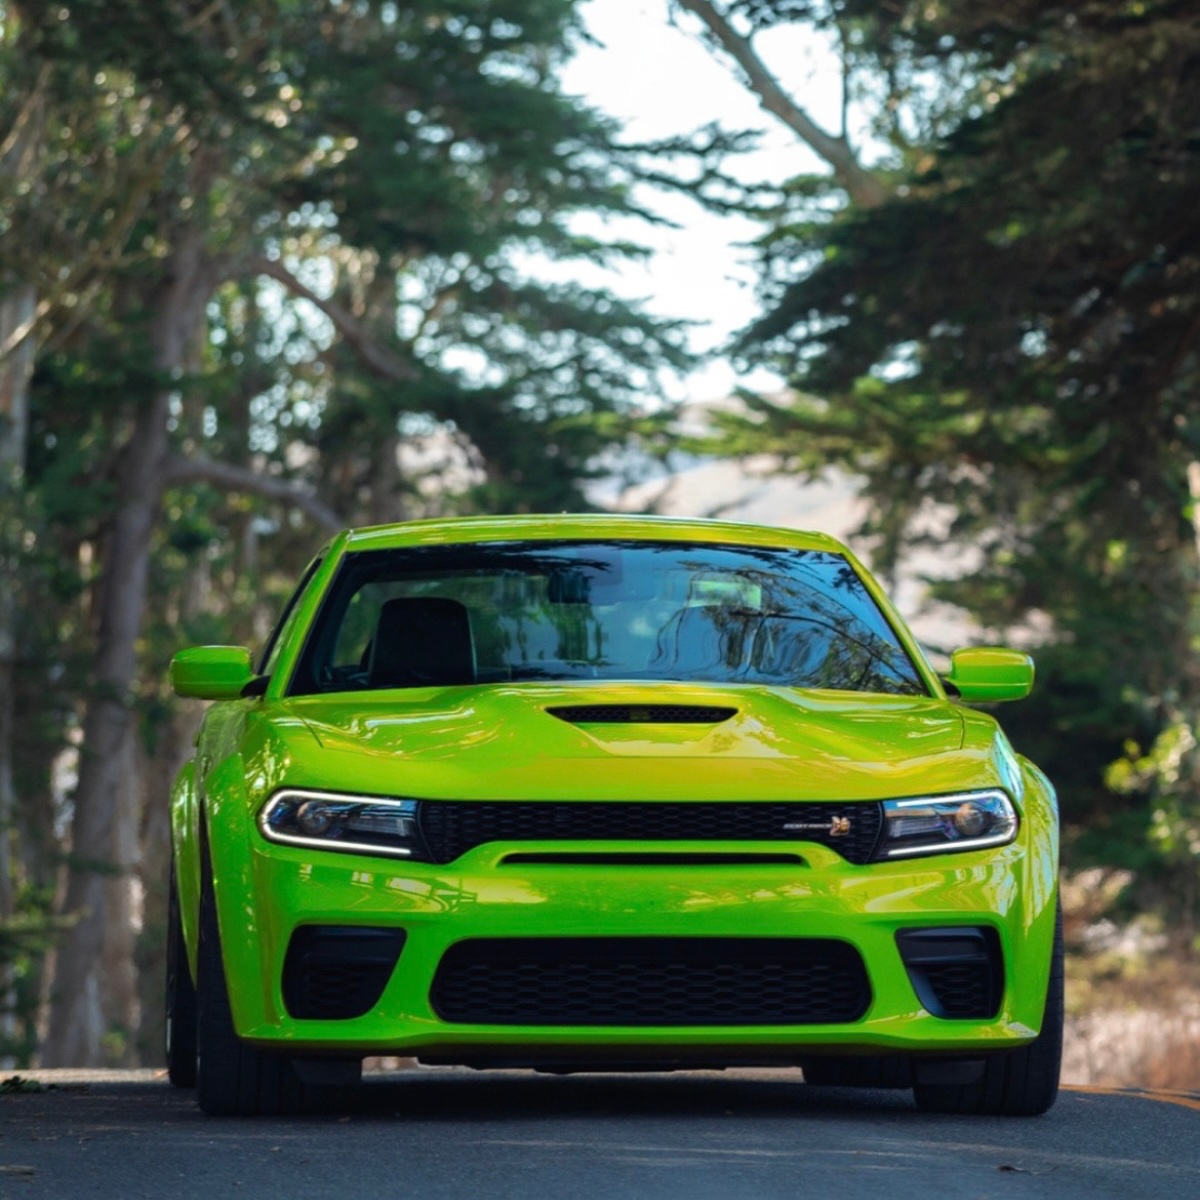 Dare to be different? 👀 Choose an extraordinary #DodgeCharger when you visit us this weekend! This exhilarating ride is your key to spicing up every mile on the road! 😮‍💨🔥 #TGIF #Dodge #DodgeUSA